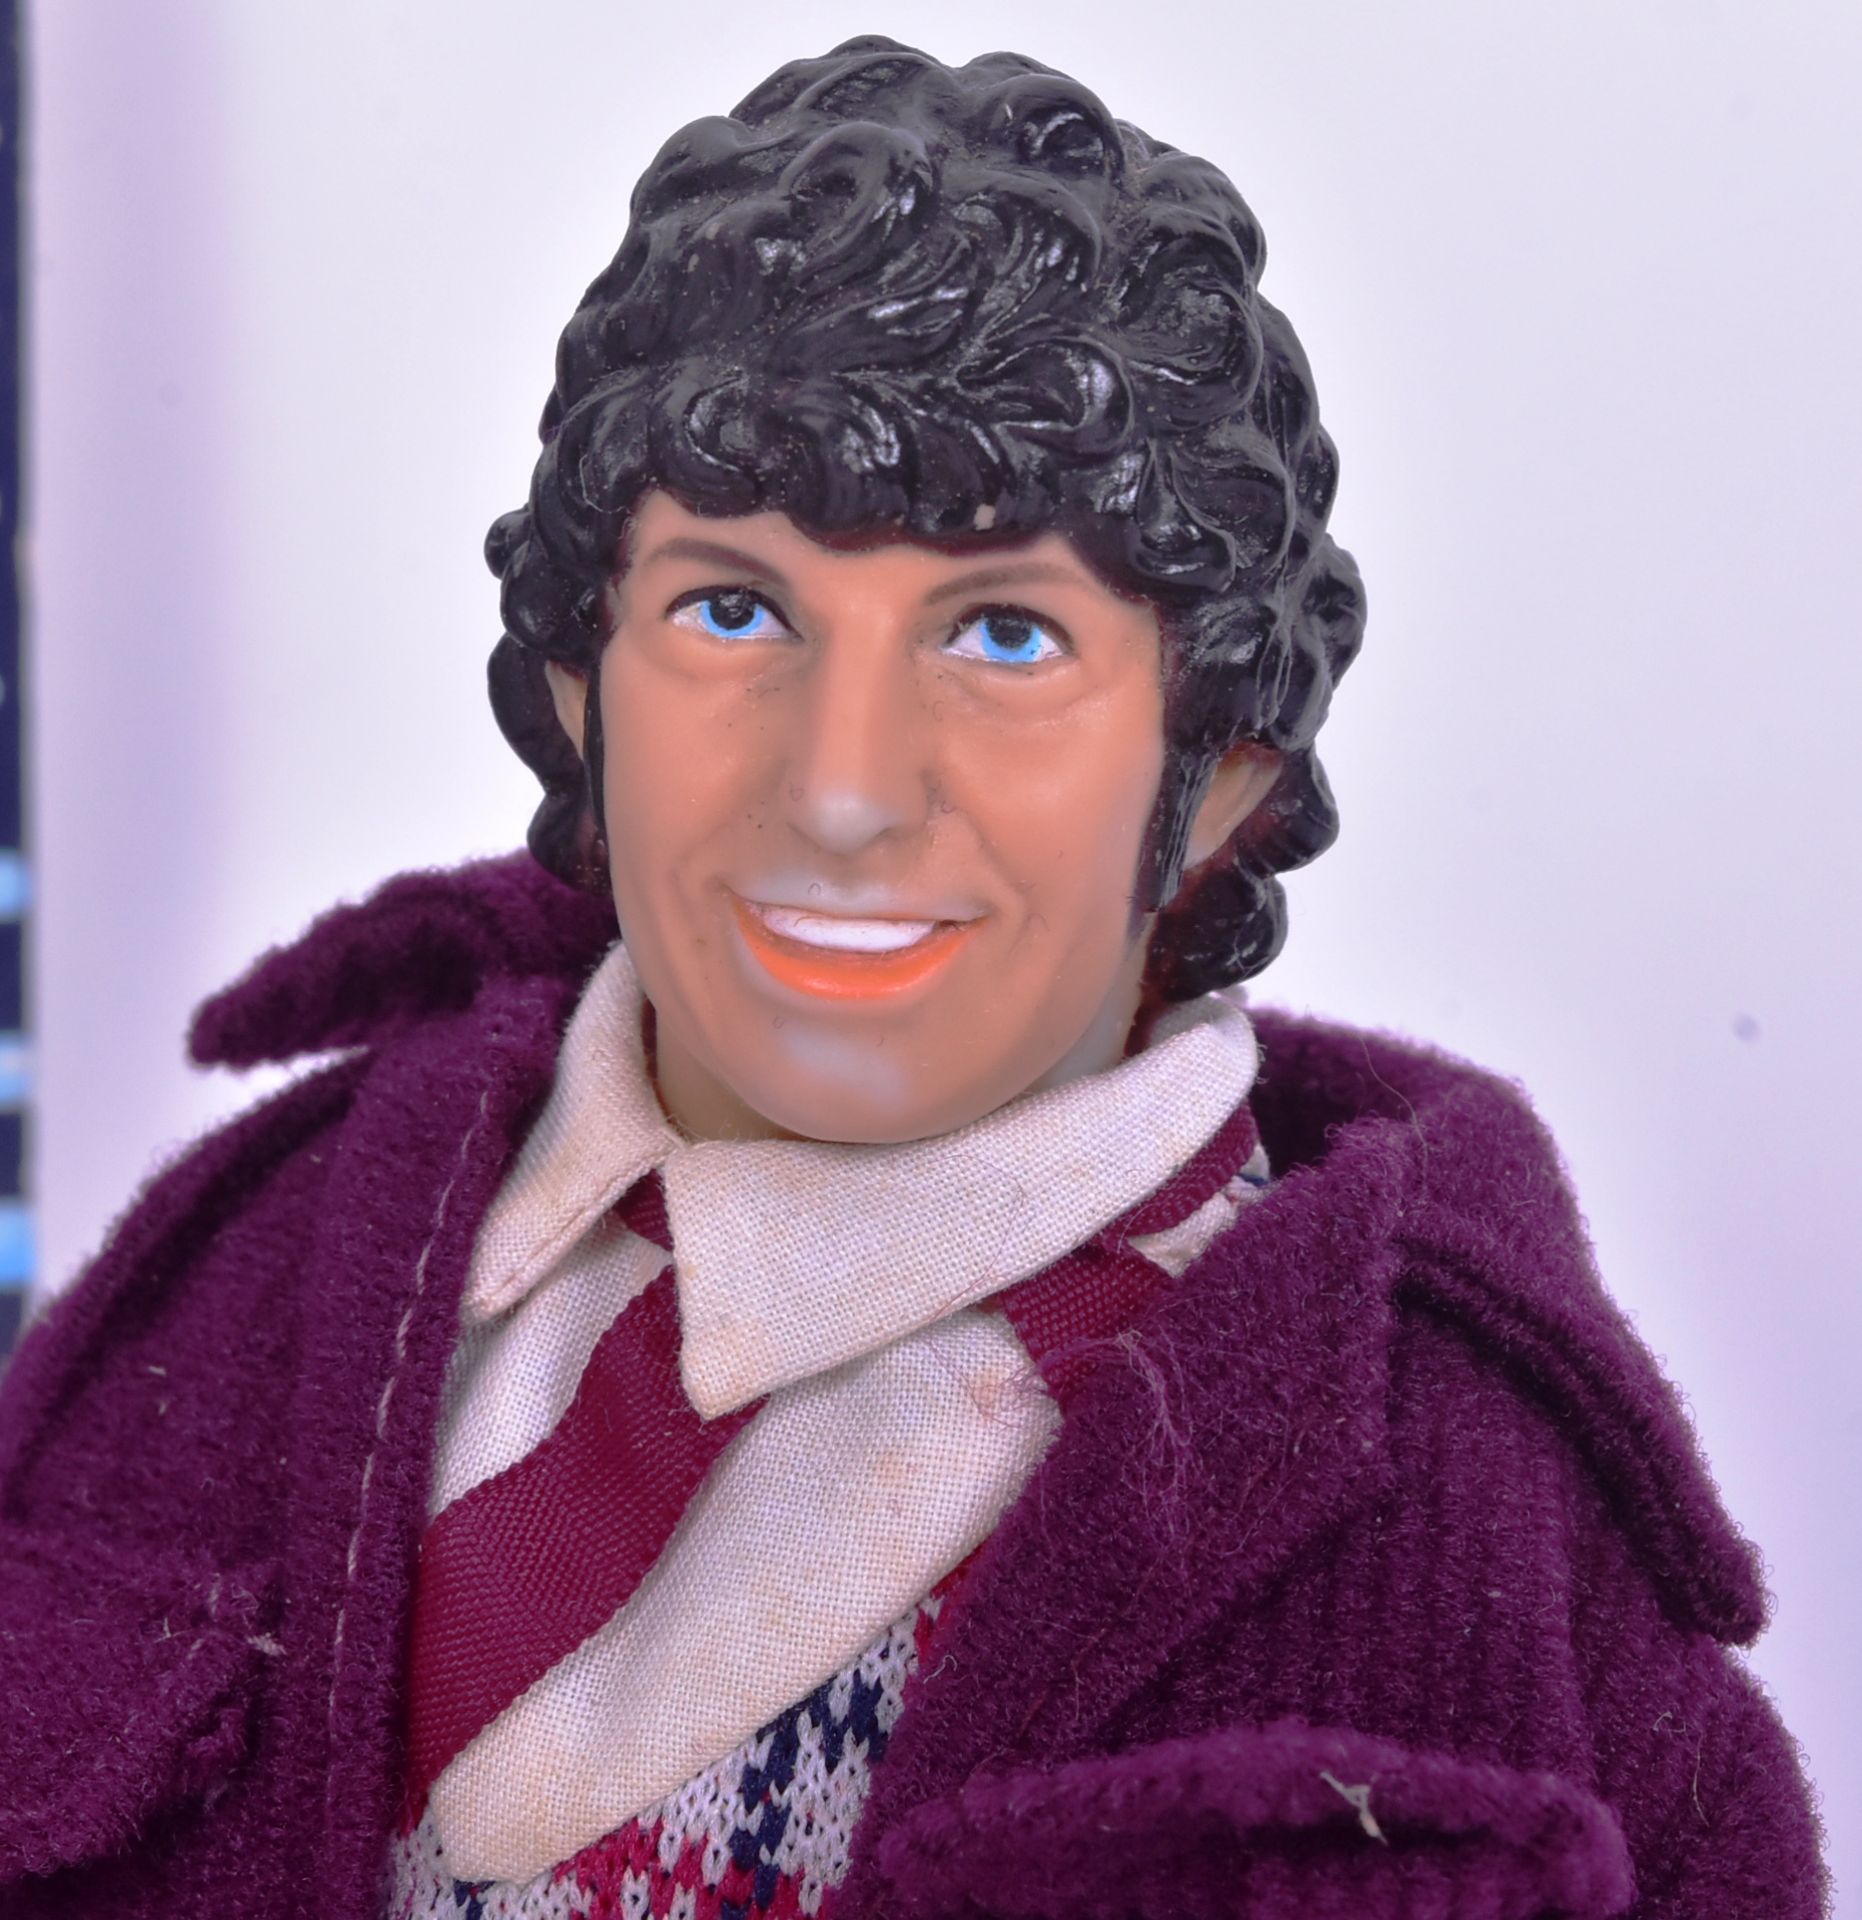 DOCTOR WHO - DENYS FISHER / HARBERT - FOURTH DOCTOR FIGURE - Image 3 of 6